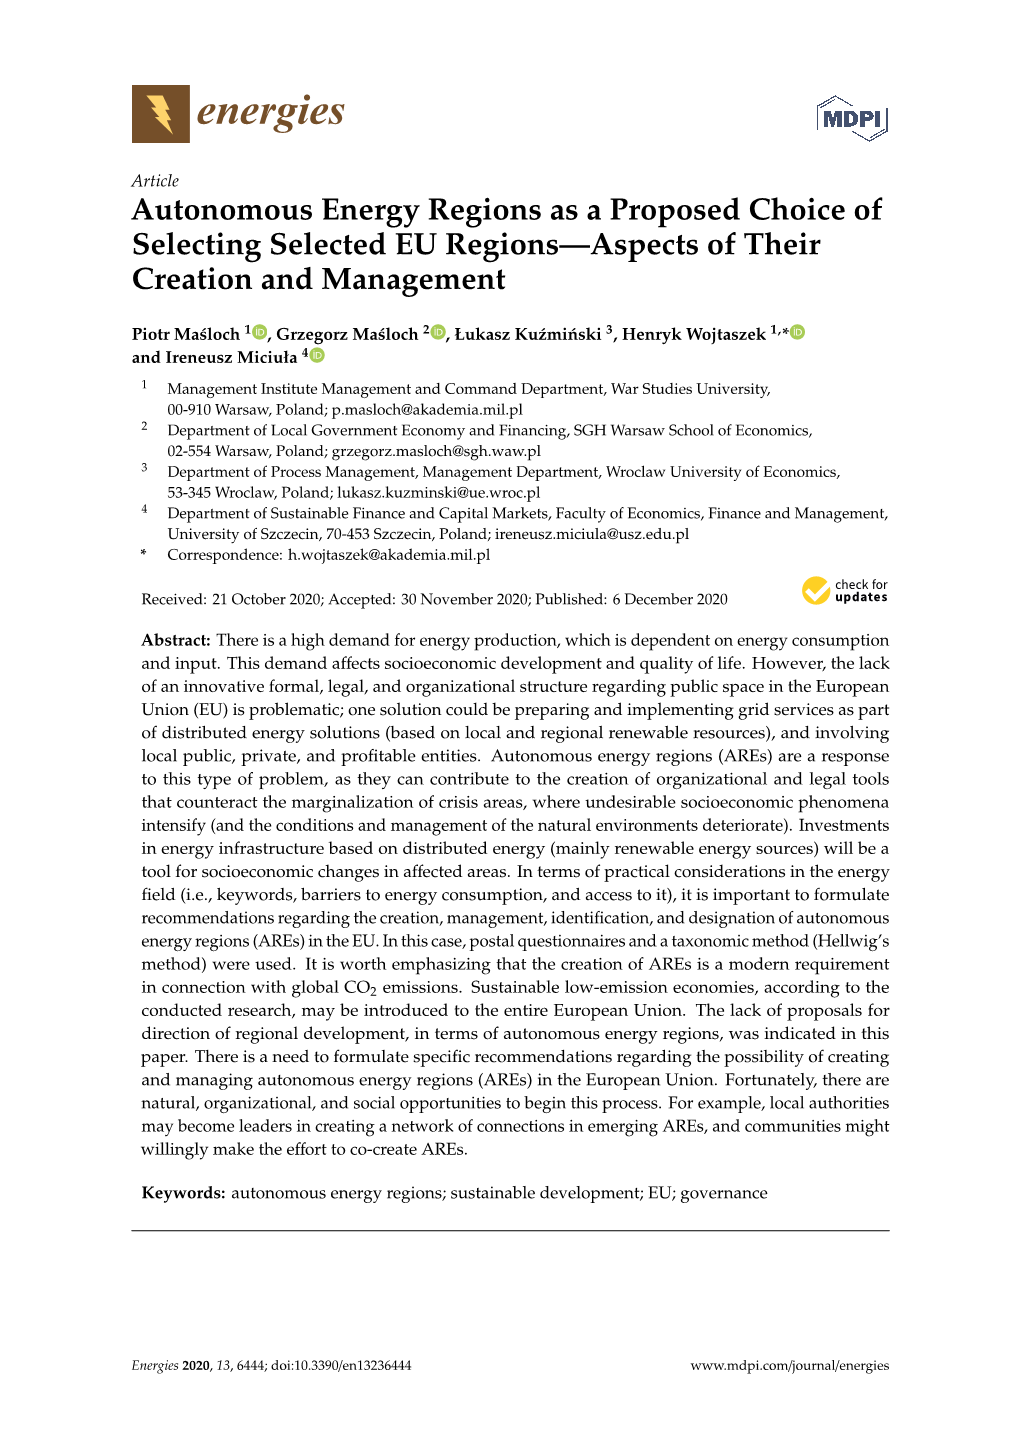 Autonomous Energy Regions As a Proposed Choice of Selecting Selected EU Regions—Aspects of Their Creation and Management